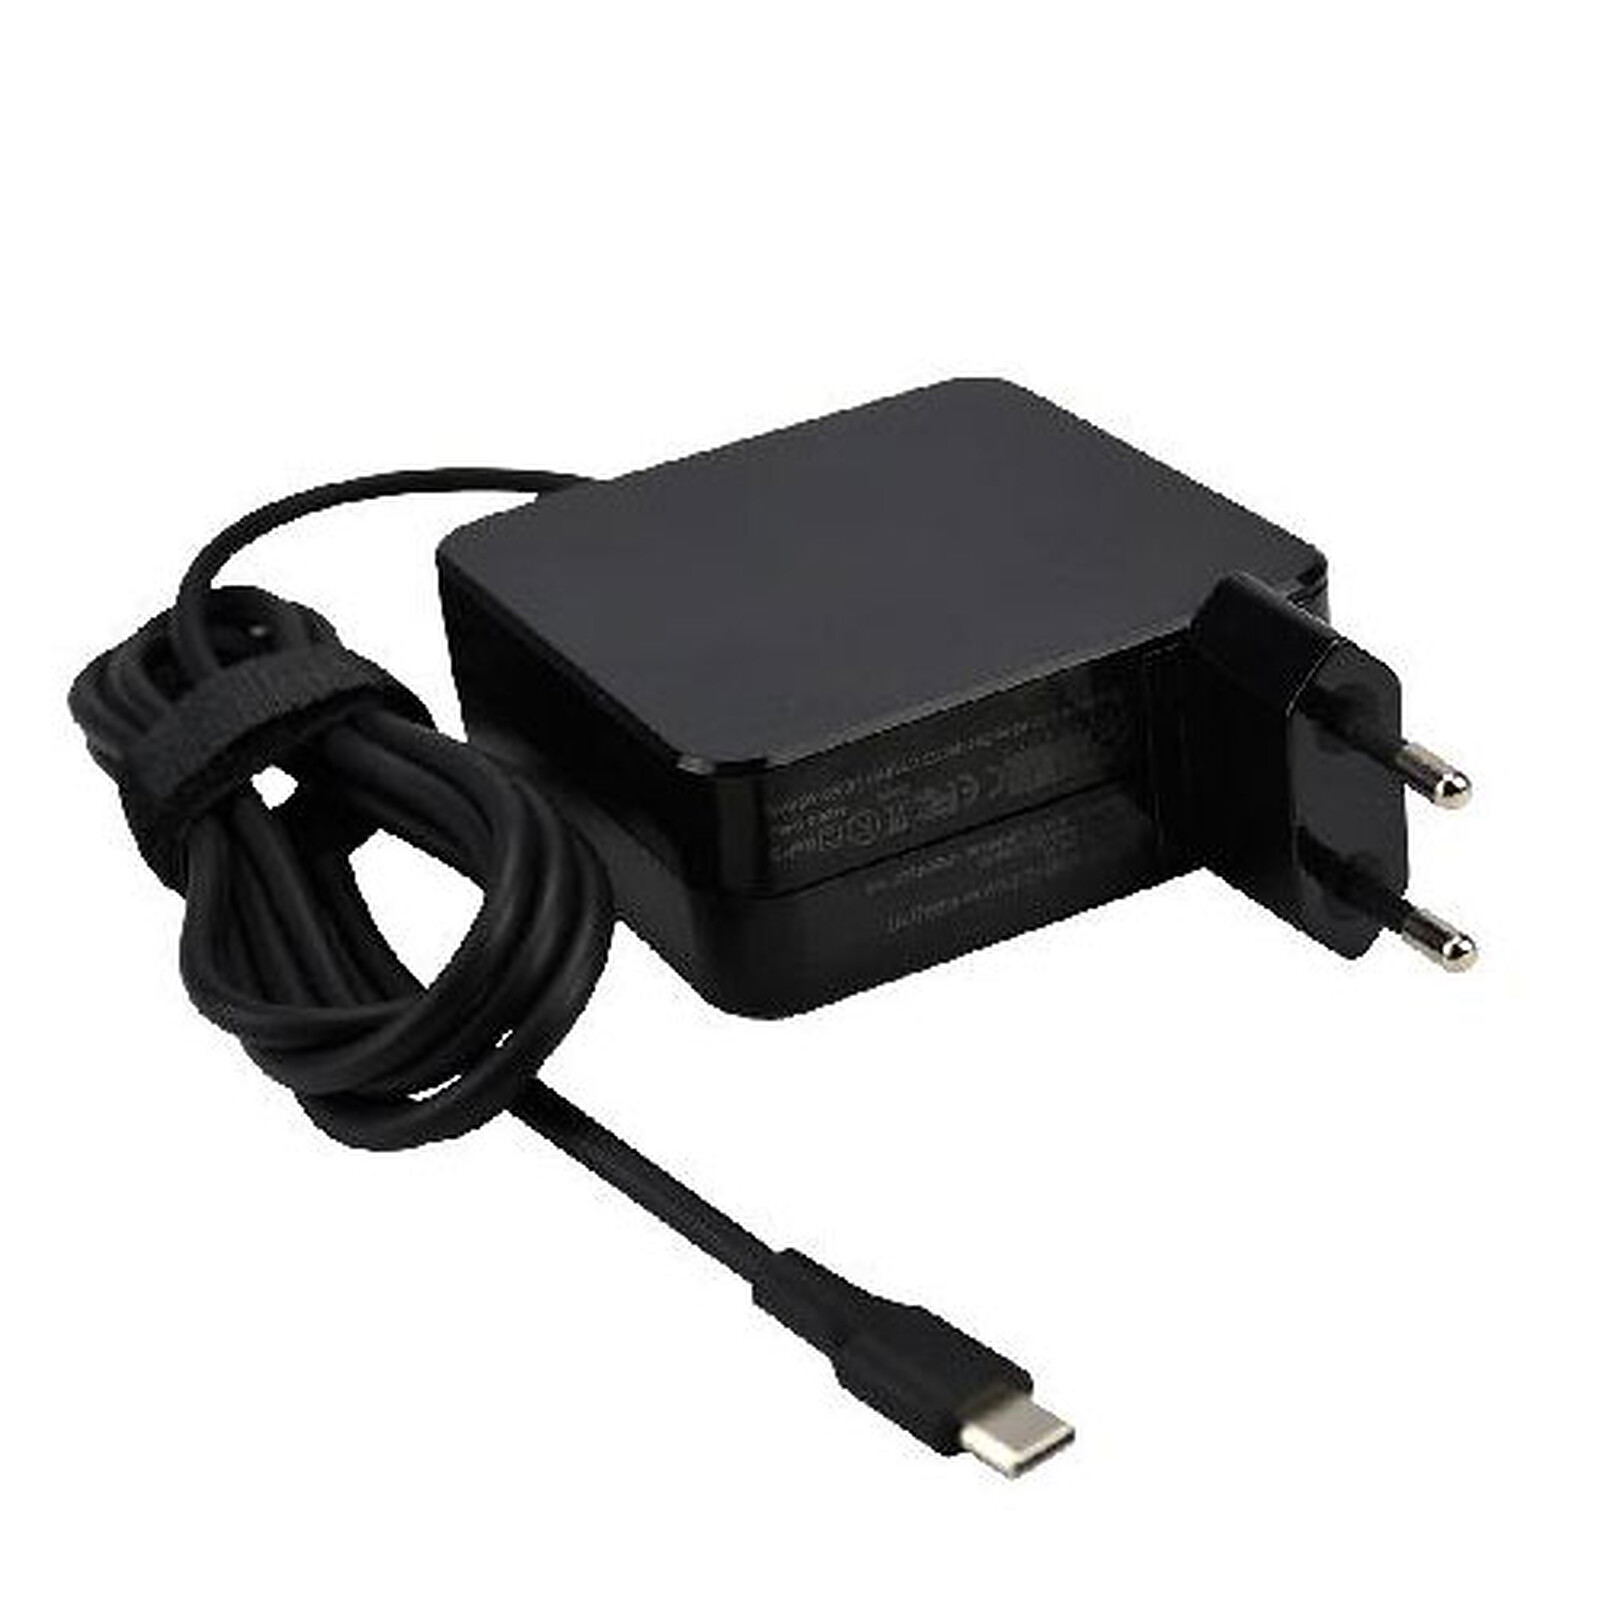 USB-C Power Delivery Charger (65W) - USB - LDLC 3-year warranty